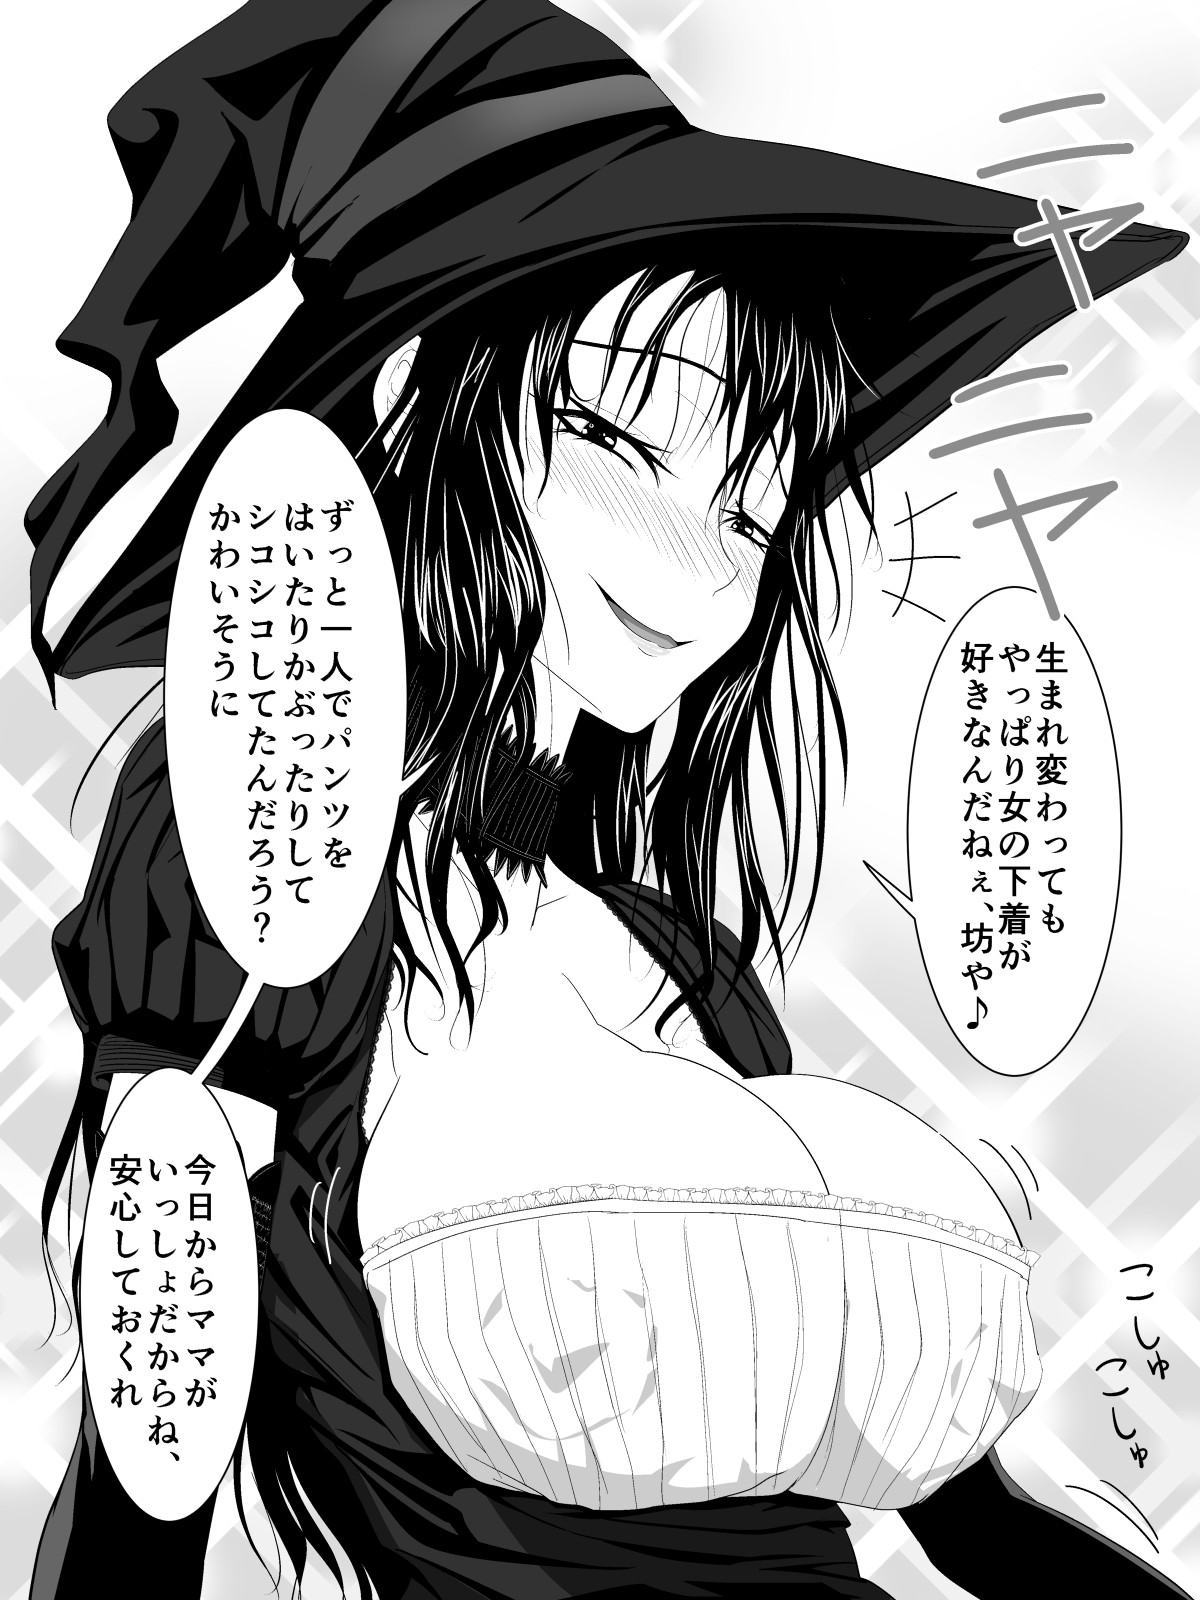 [Moonlight Diner] A Witch In Black Dress Suddenly Shows Up, So I Ask Her To Be My Mama [ムーンライト・ダイナー] 突然現れた黒衣の魔女にもう一度ママになってもらうお話